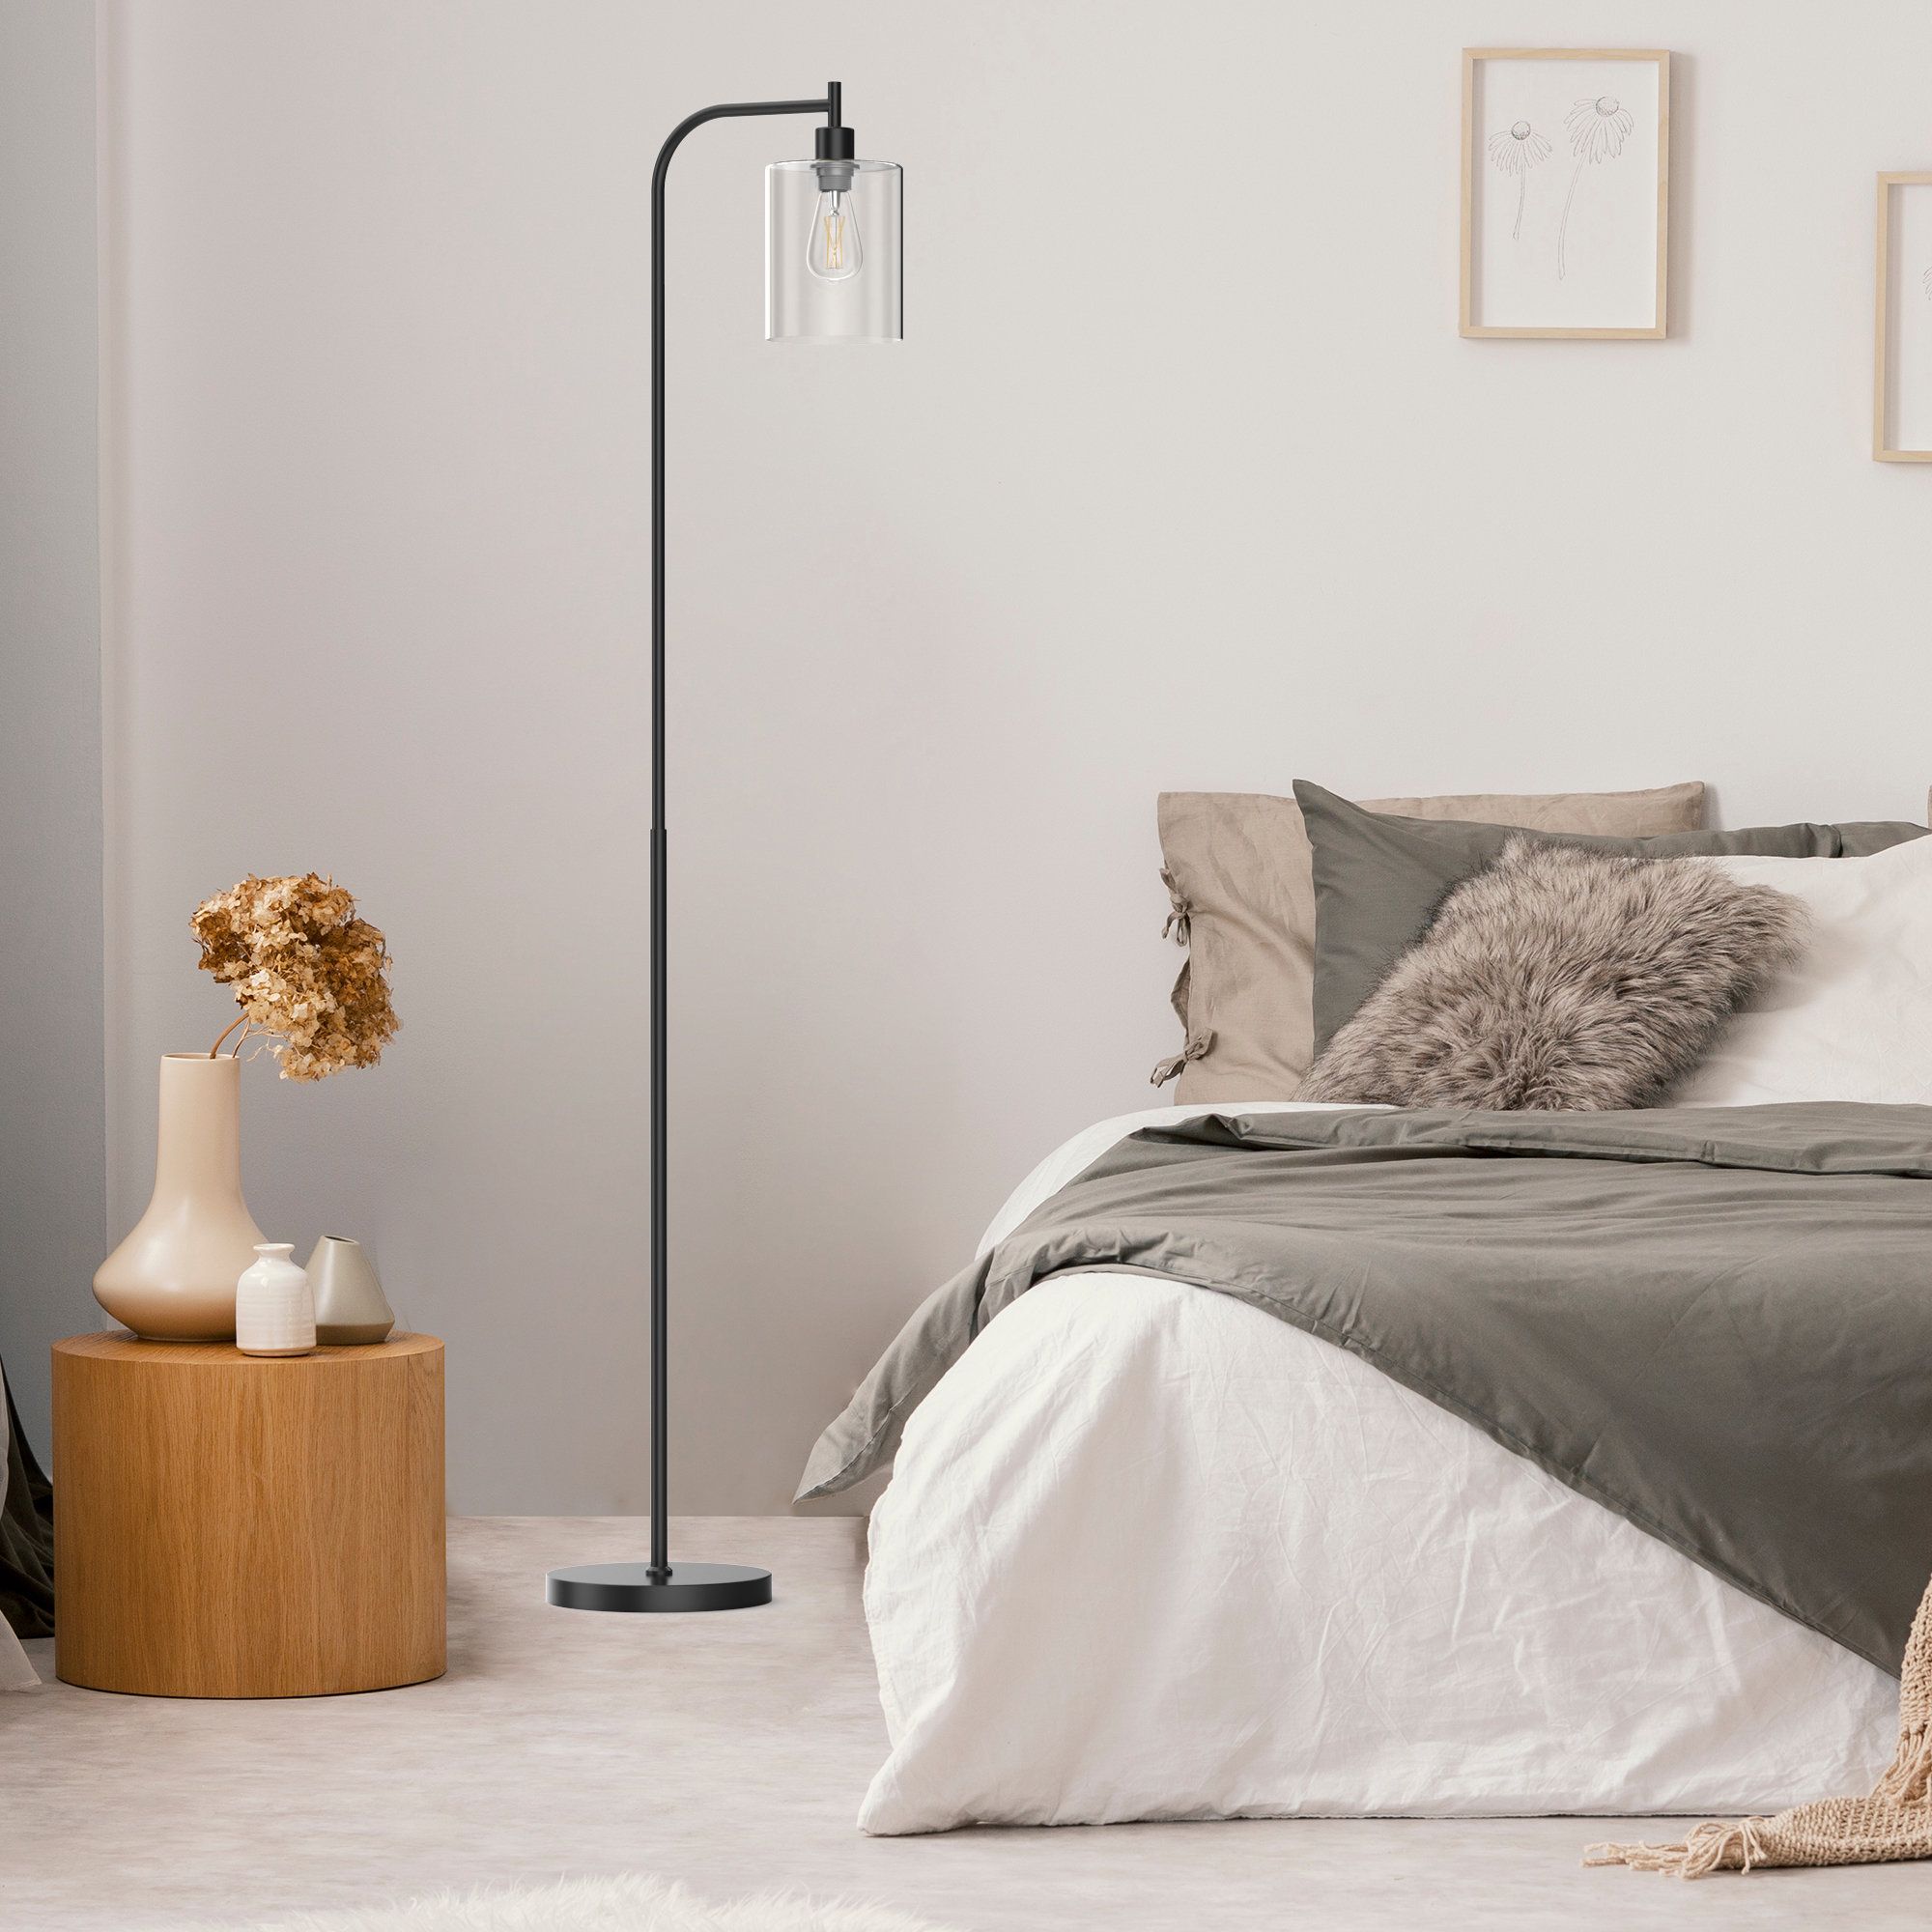 Pazzo Modern Standing Tall Industrial Arched/arc Floor Lamp With Glass  Shade And 2 Bulbs Included & Reviews | Wayfair Throughout Modern Floor Lamps (Photo 2 of 15)